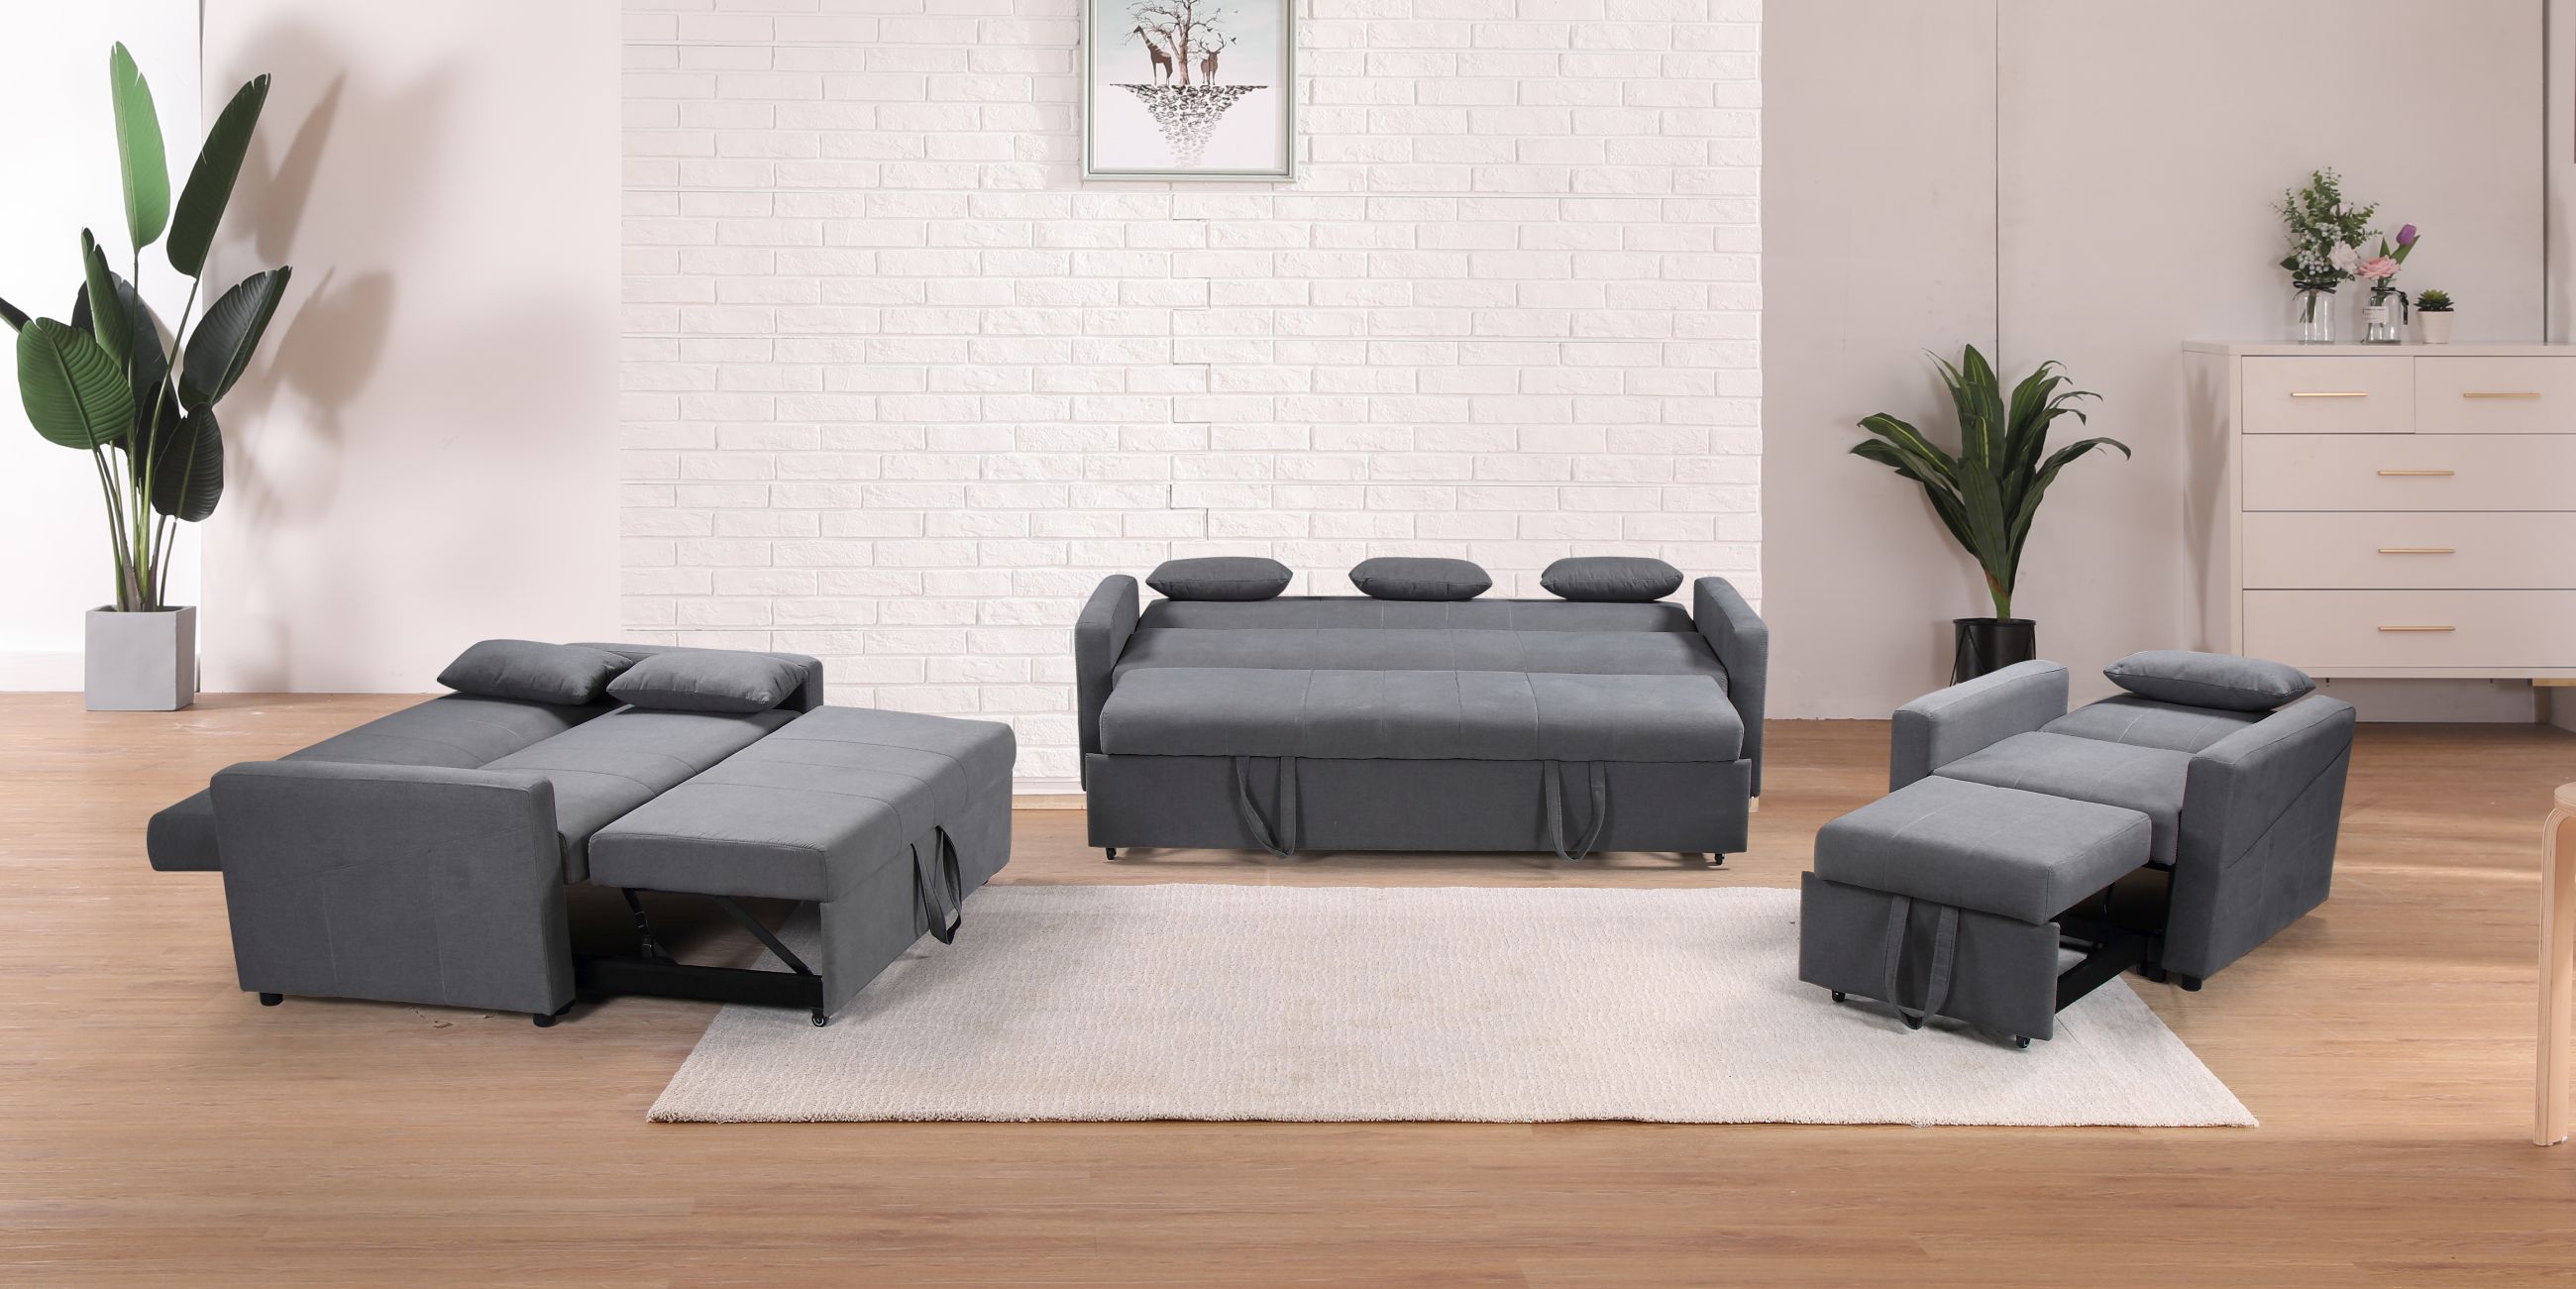 sofa bed transformer 3 in 1 table chairs